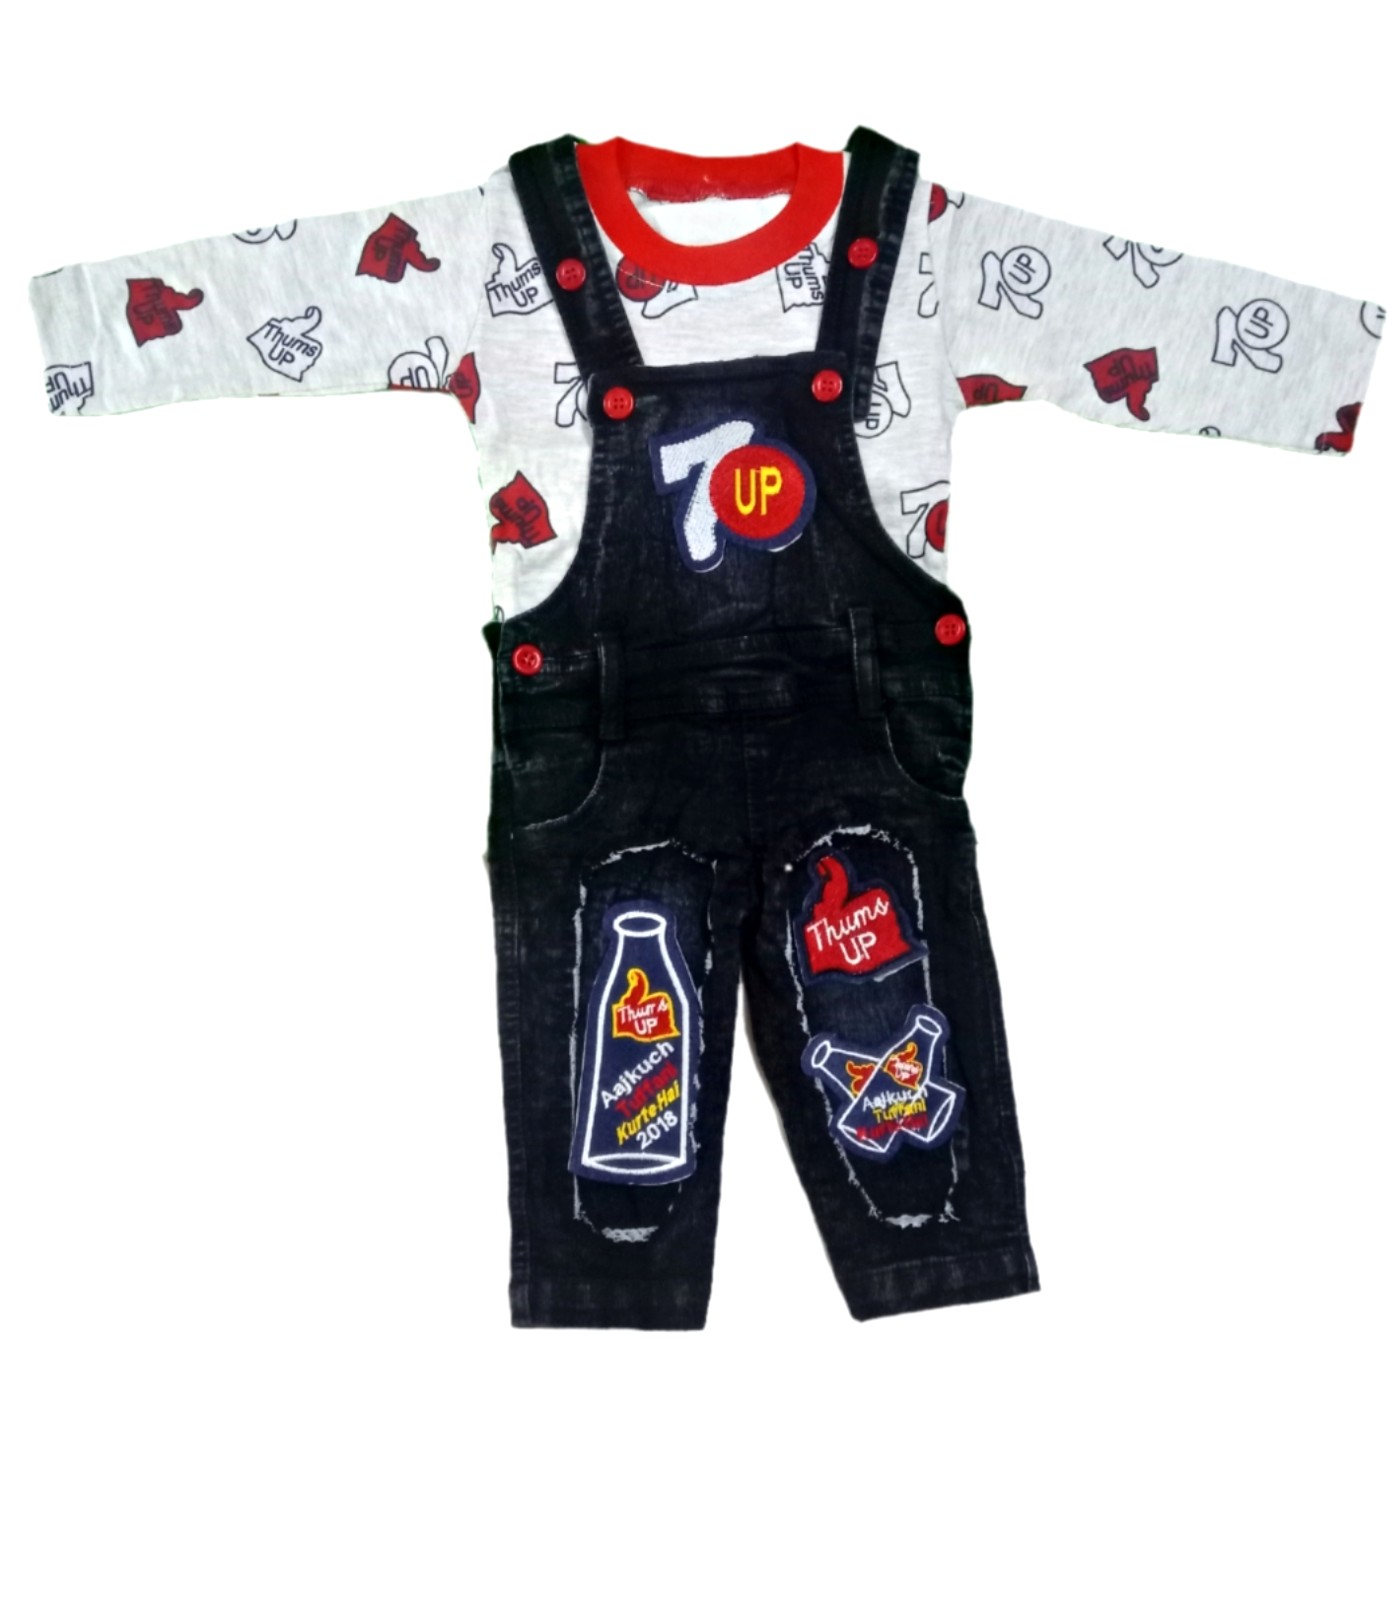 Baby Boy Clothes Sets Jumper Outfit, Babies & Kids, Babies & Kids Fashion  on Carousell